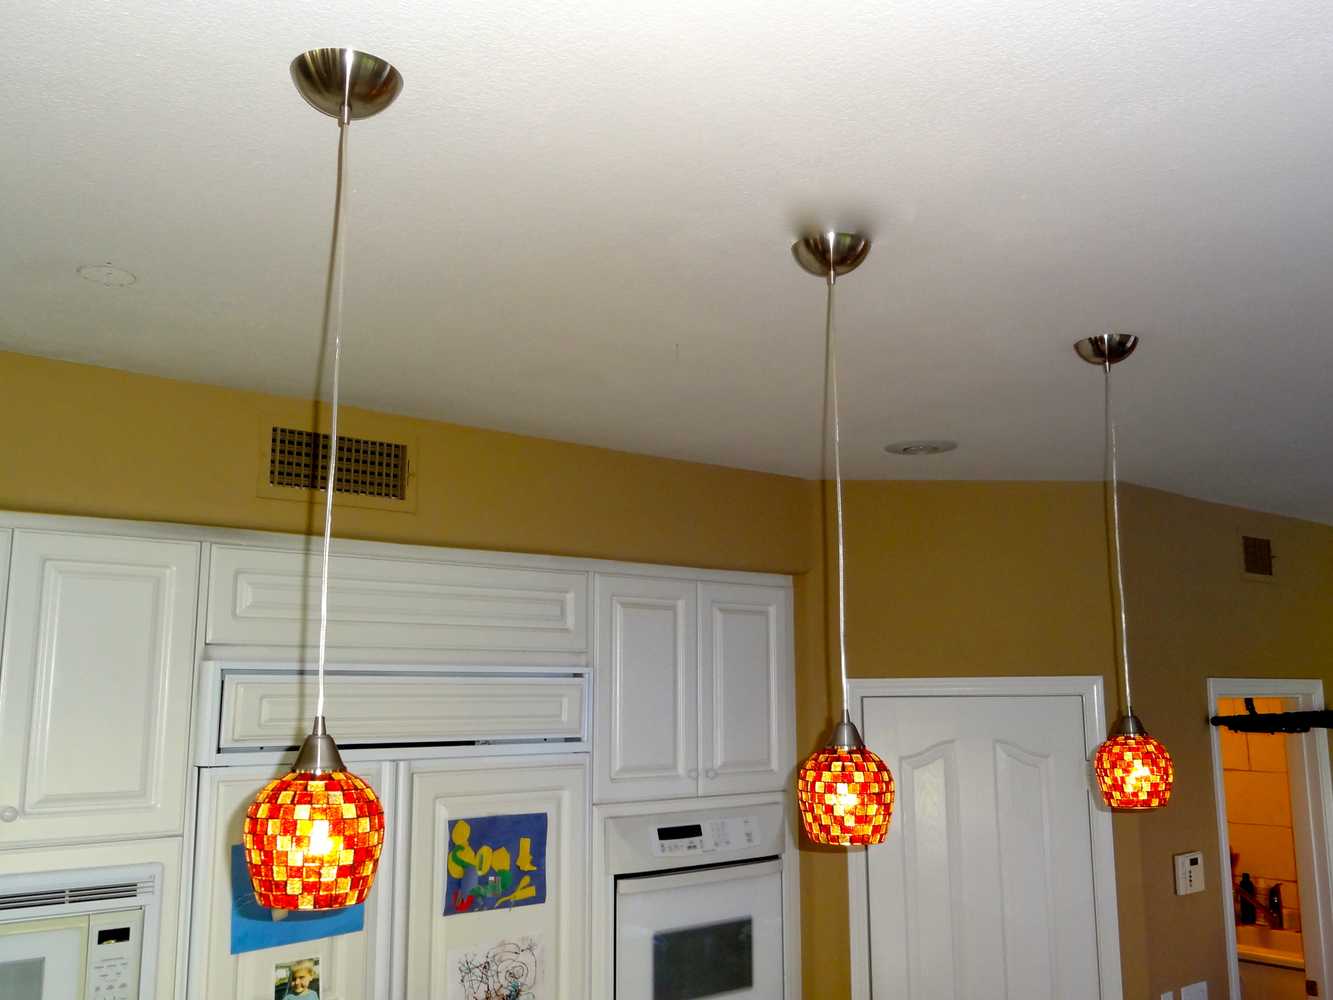 Carlsbad, Ca, kitchen pendants over Islands, and Dining chandalier.